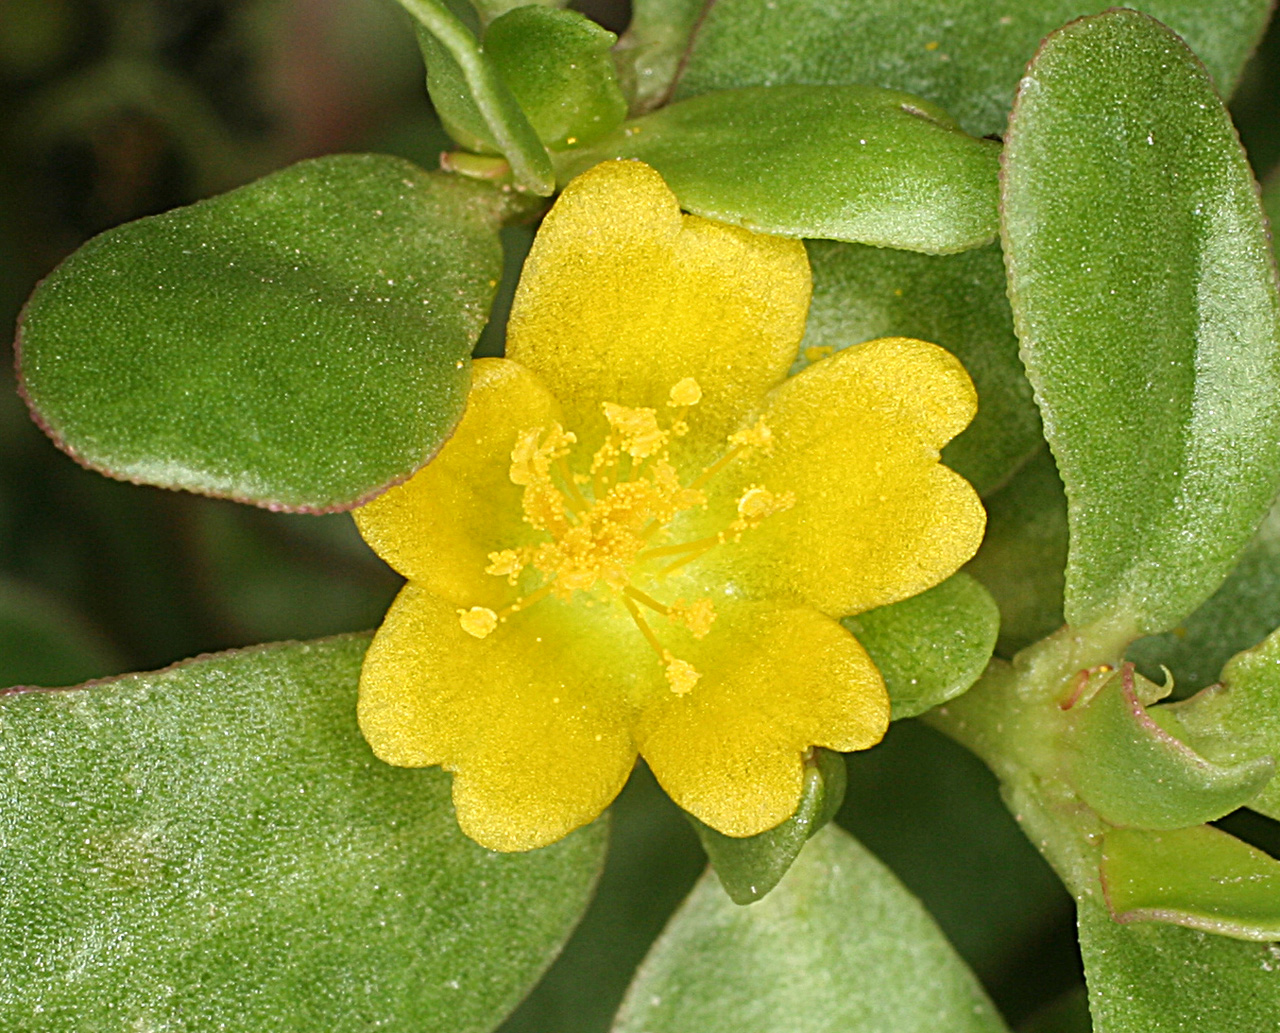 Foliage and yellow flower. The five petals are two-lobed. Stamens are yellow.